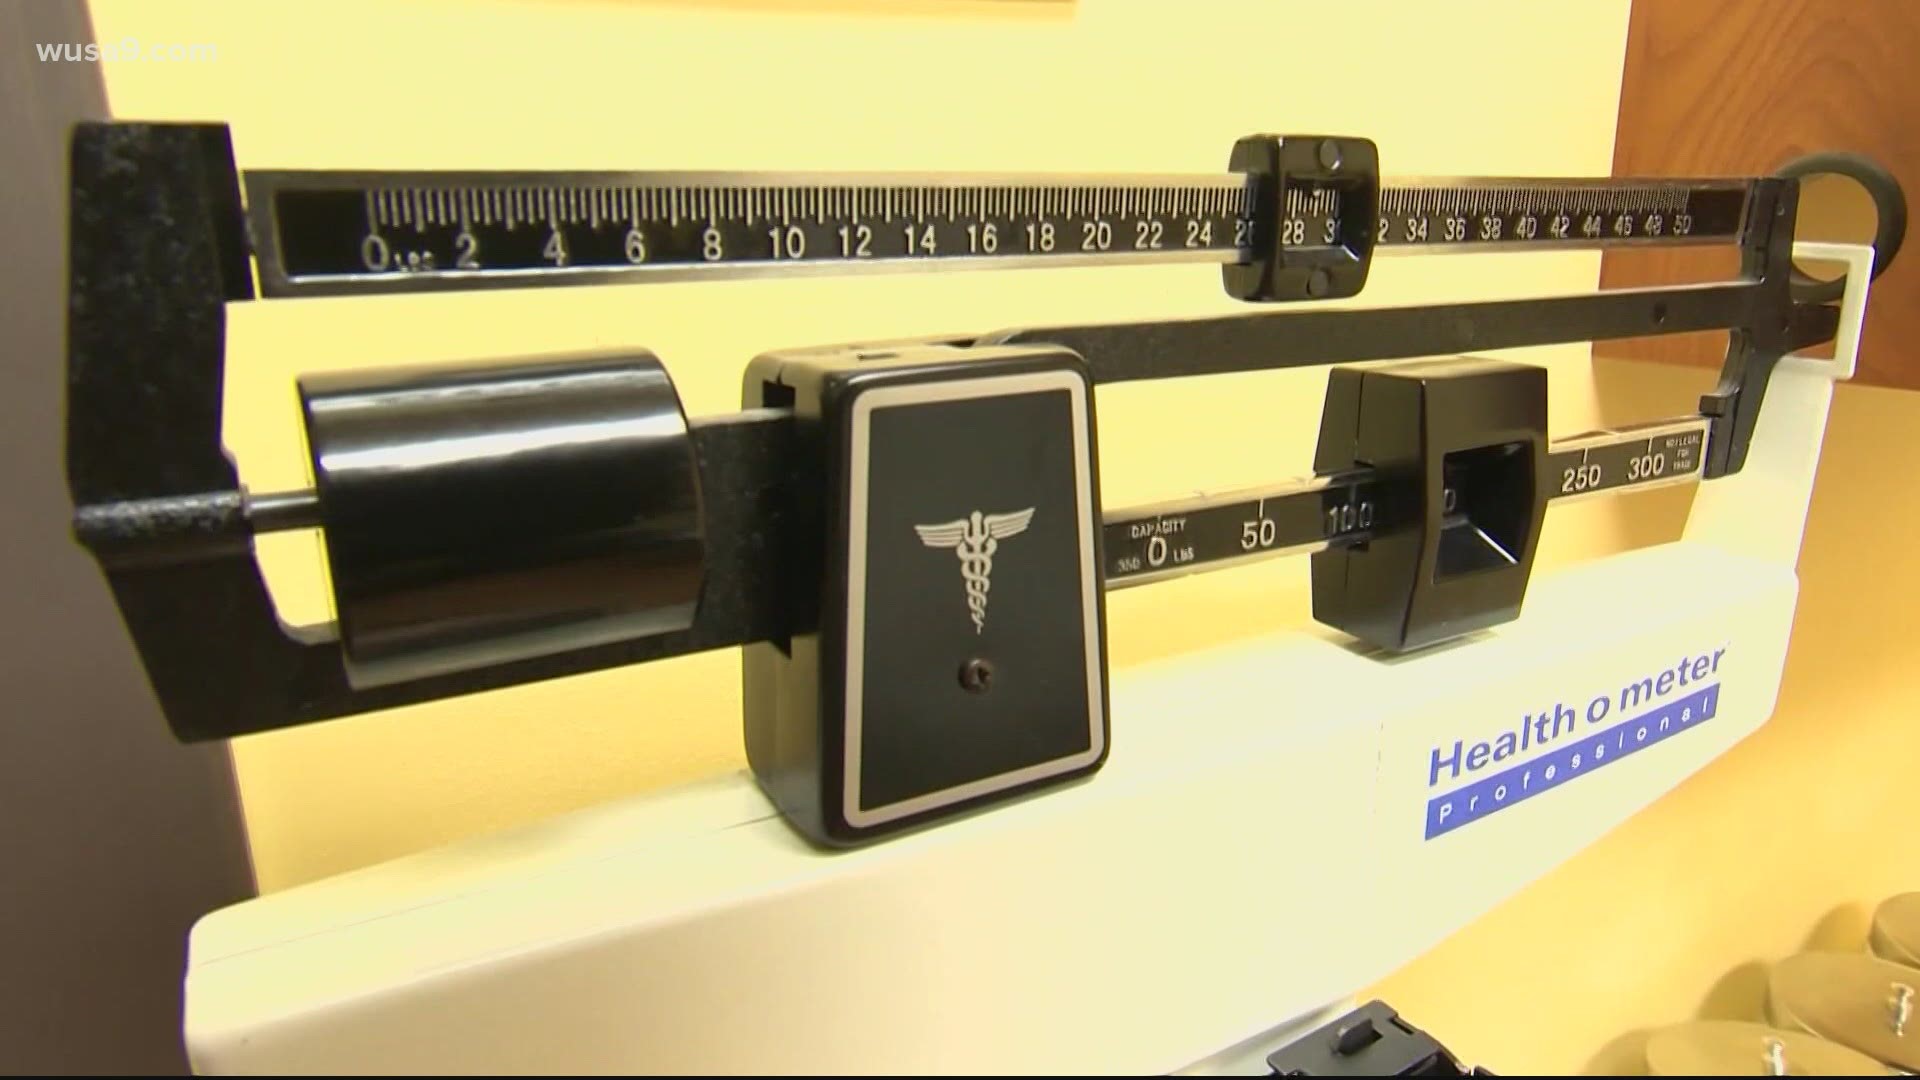 A high BMI is one of the underlying health conditions that can now qualify you for a vaccine in the DMV - but what does that number really mean?